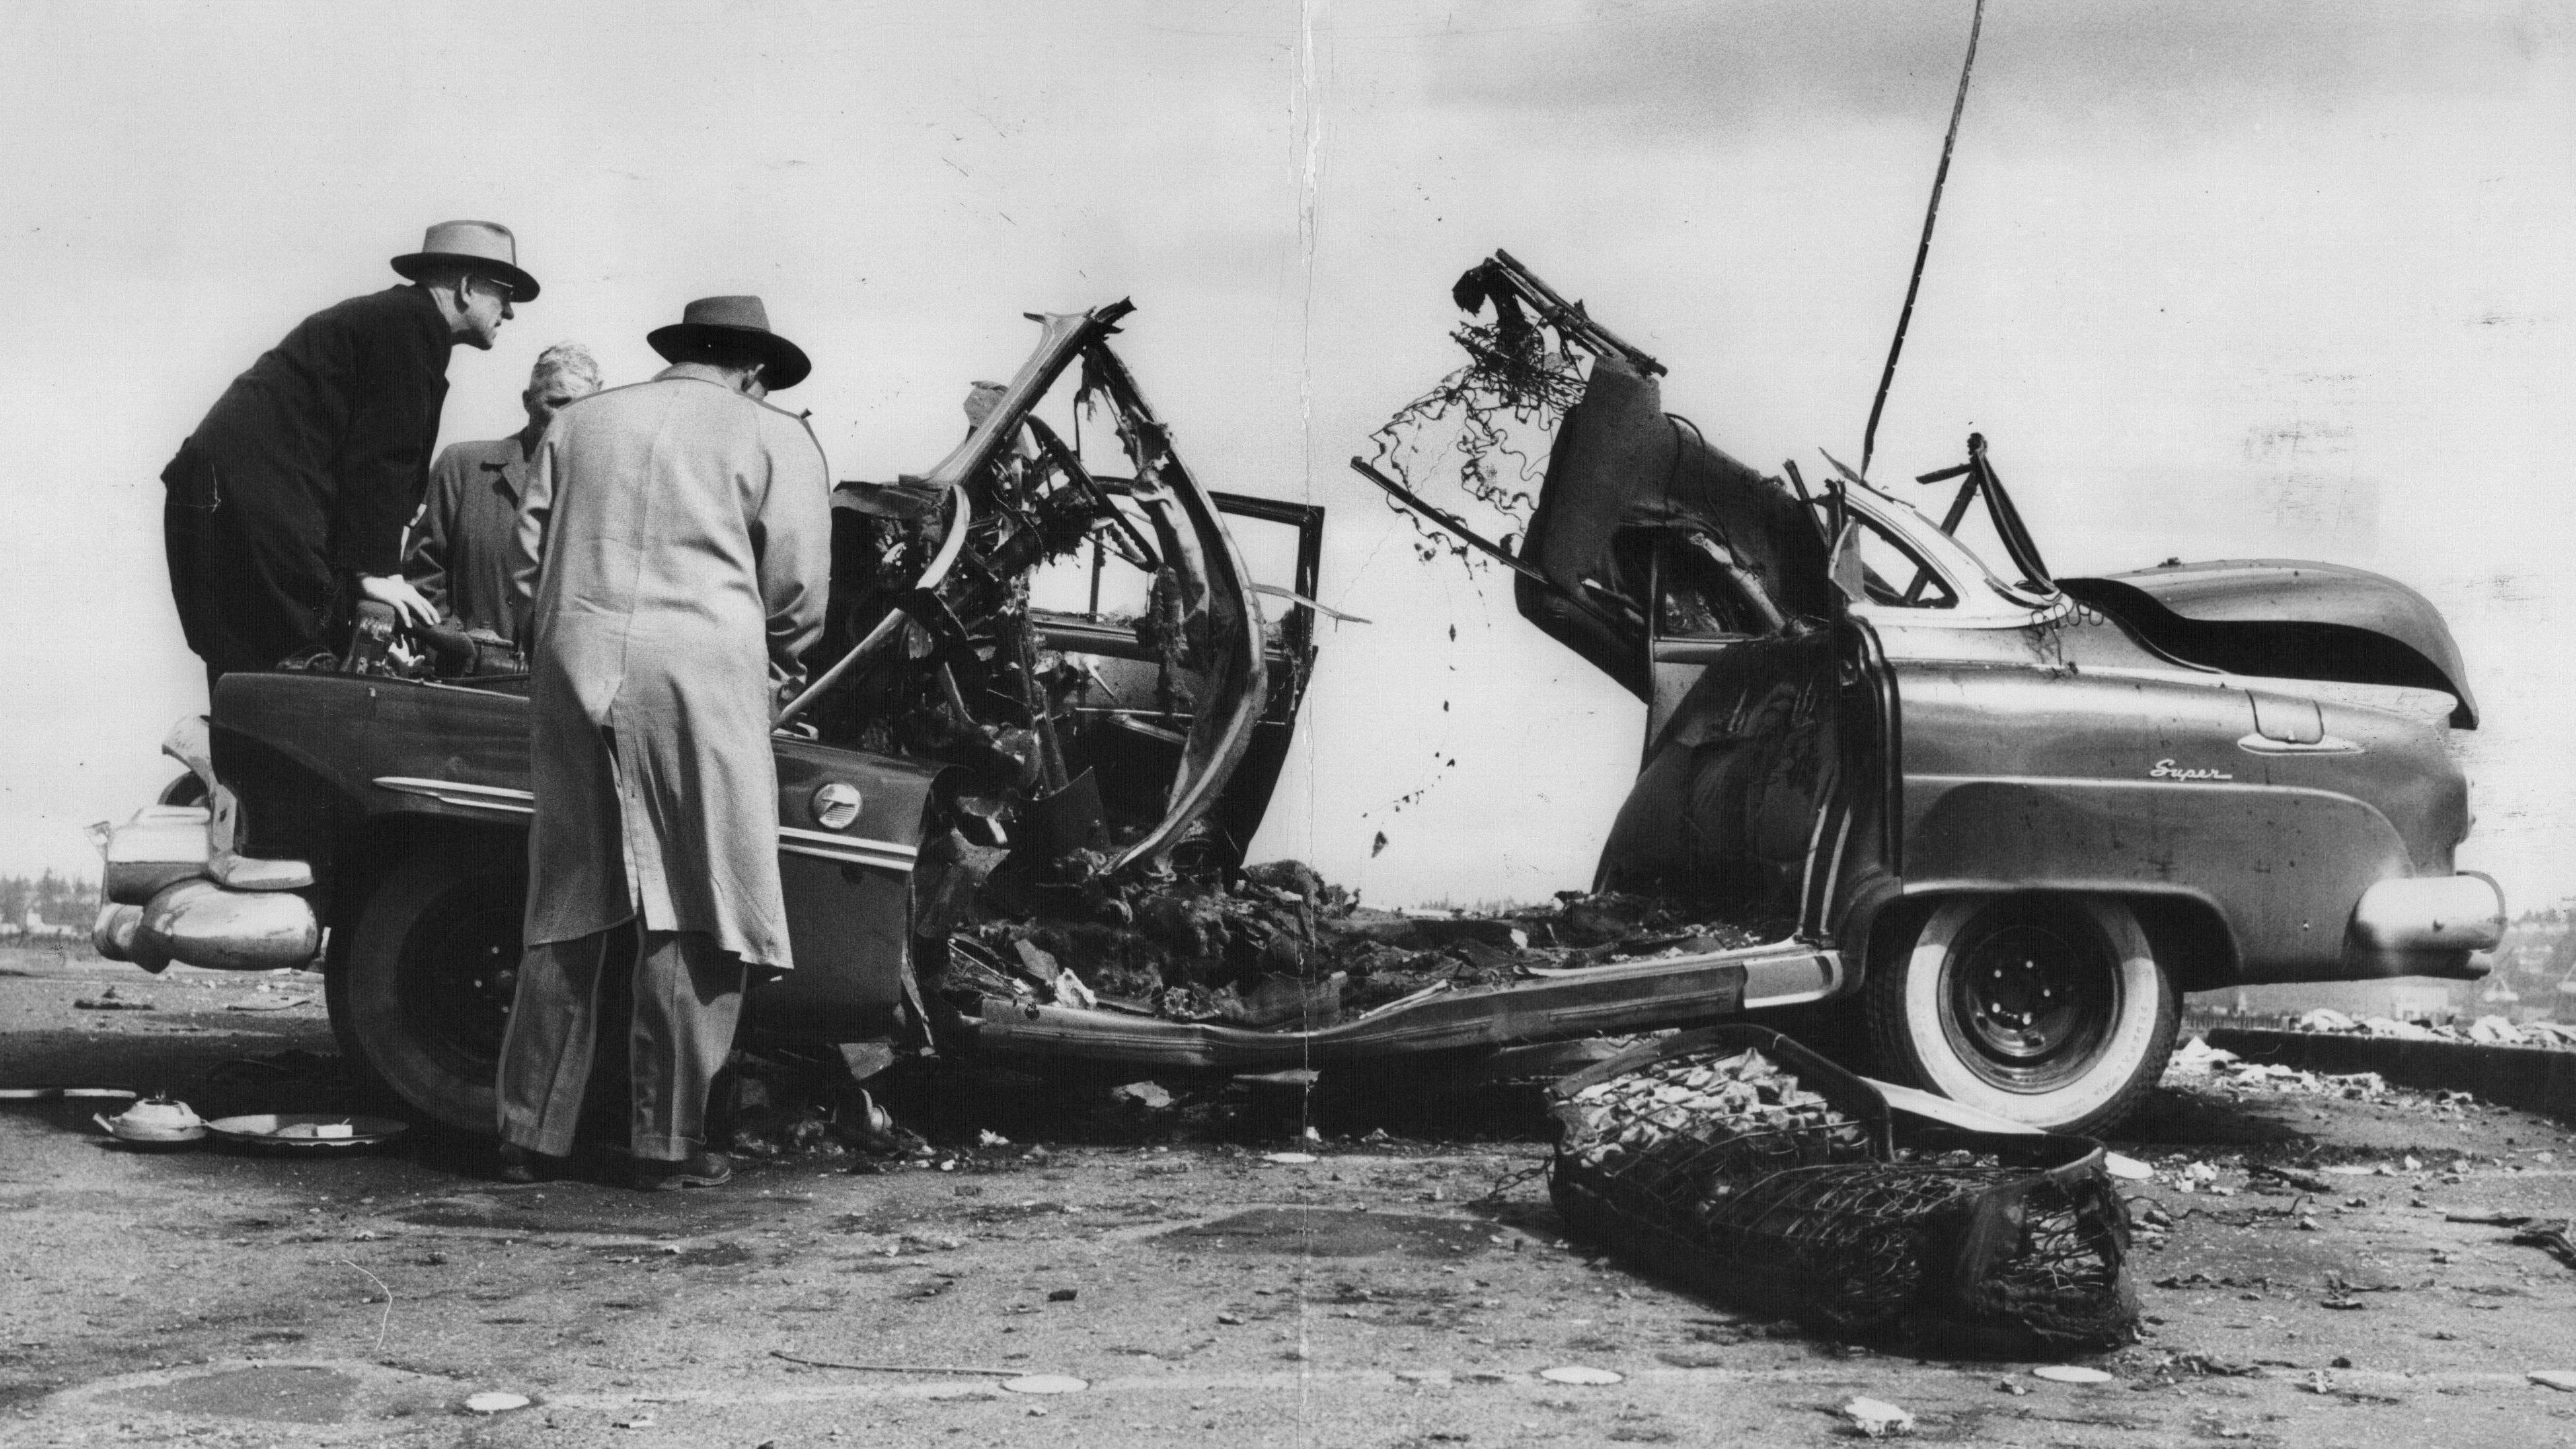 Sex slave murder case rocked Portland 65 years ago Car bombing led to 8 months of hell for suspect Marjorie Smith pic